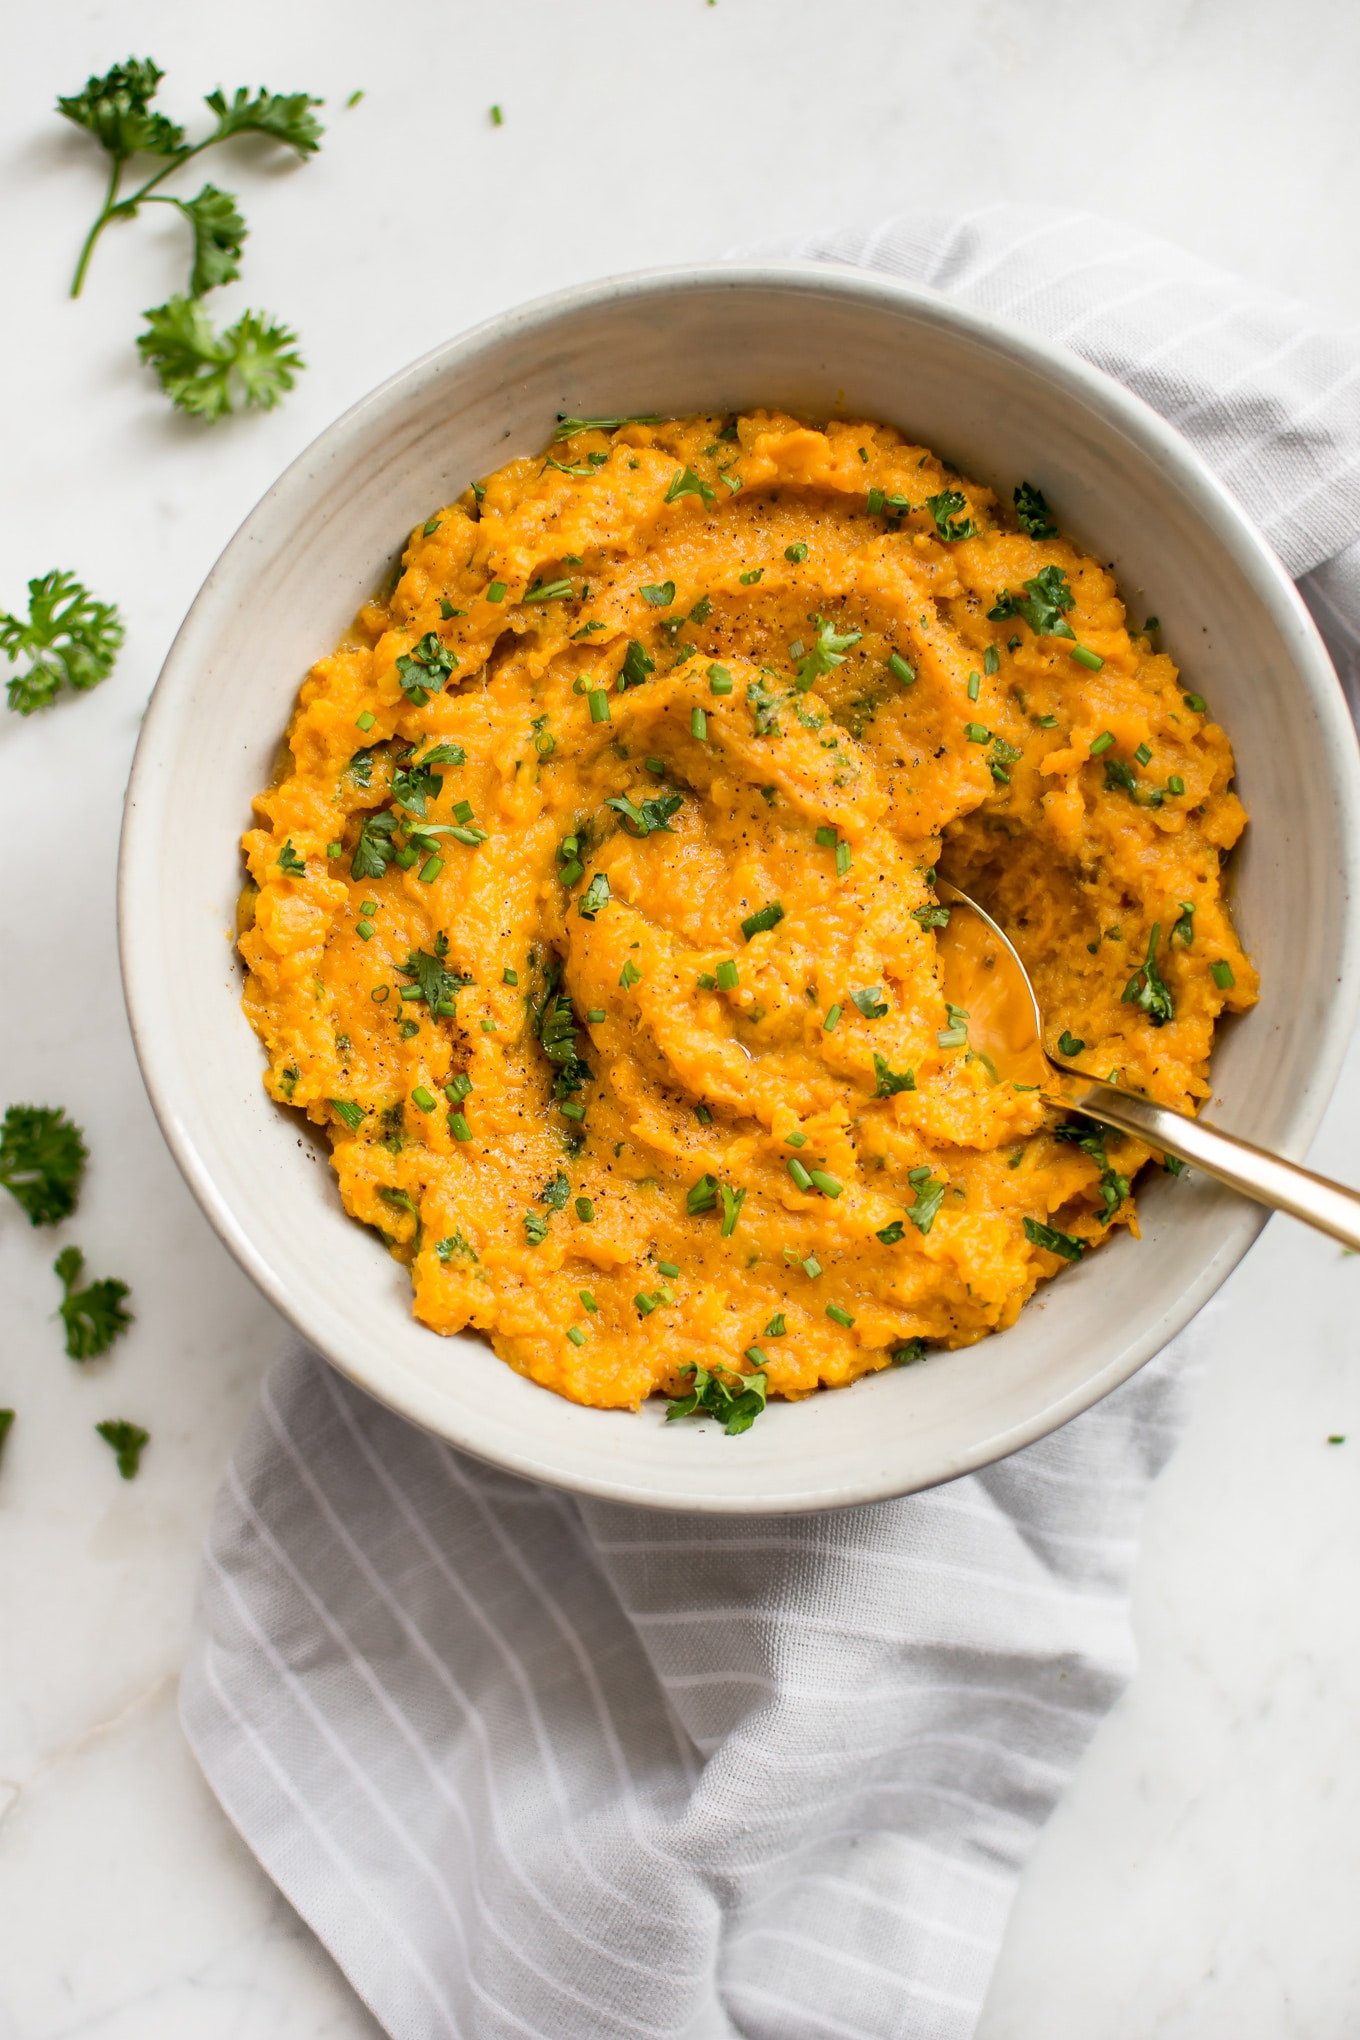 Mashed Sweet Potatoes Healthy
 Easy and Healthier Instant Pot Mashed Sweet Potatoes